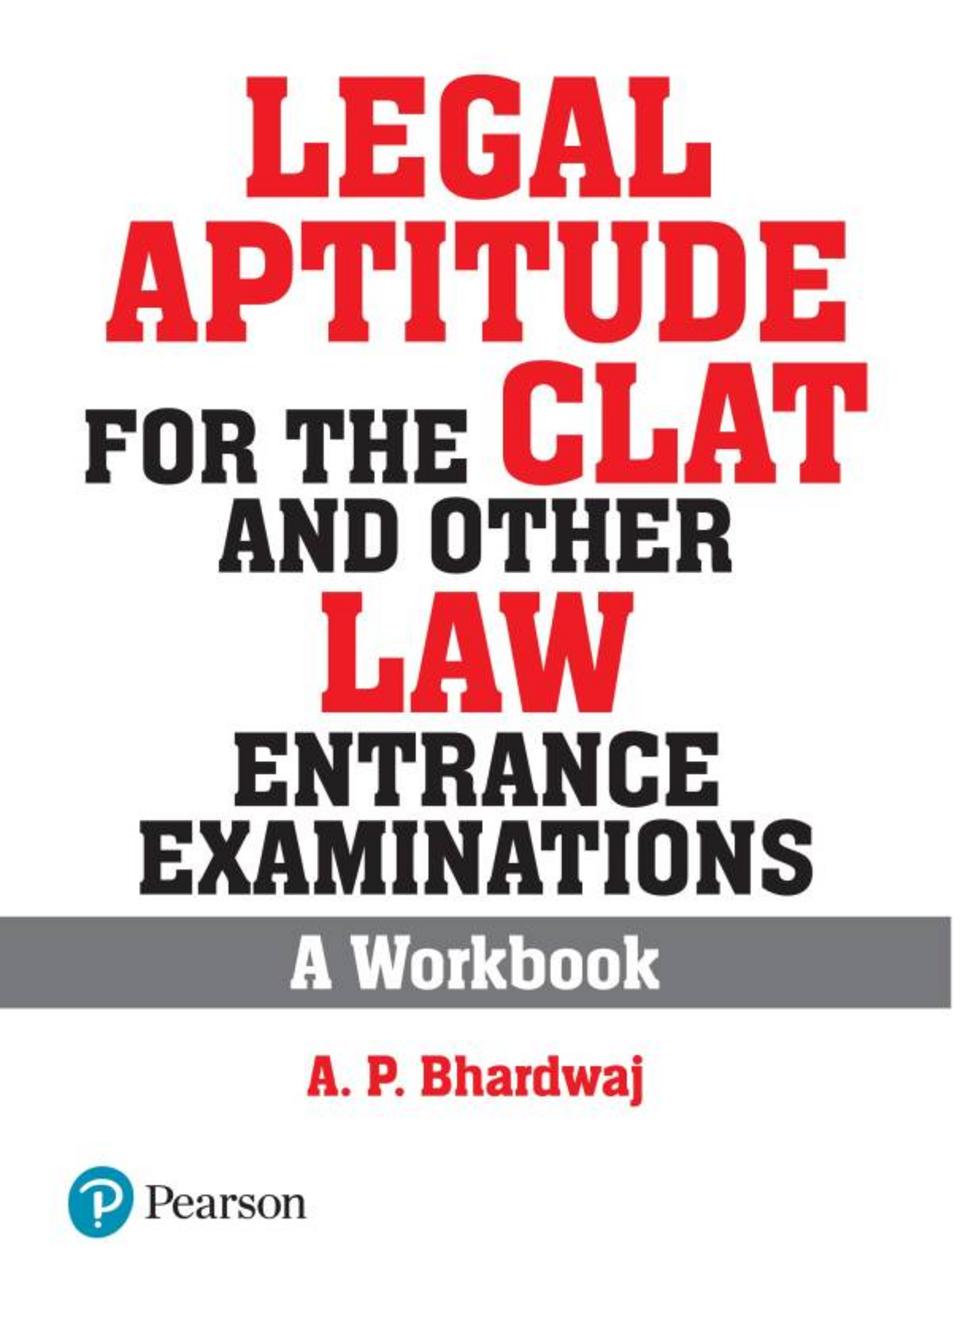 buy-legal-aptitude-for-the-clat-other-law-entrance-examinations-a-workbook-book-ap-bhardwaj